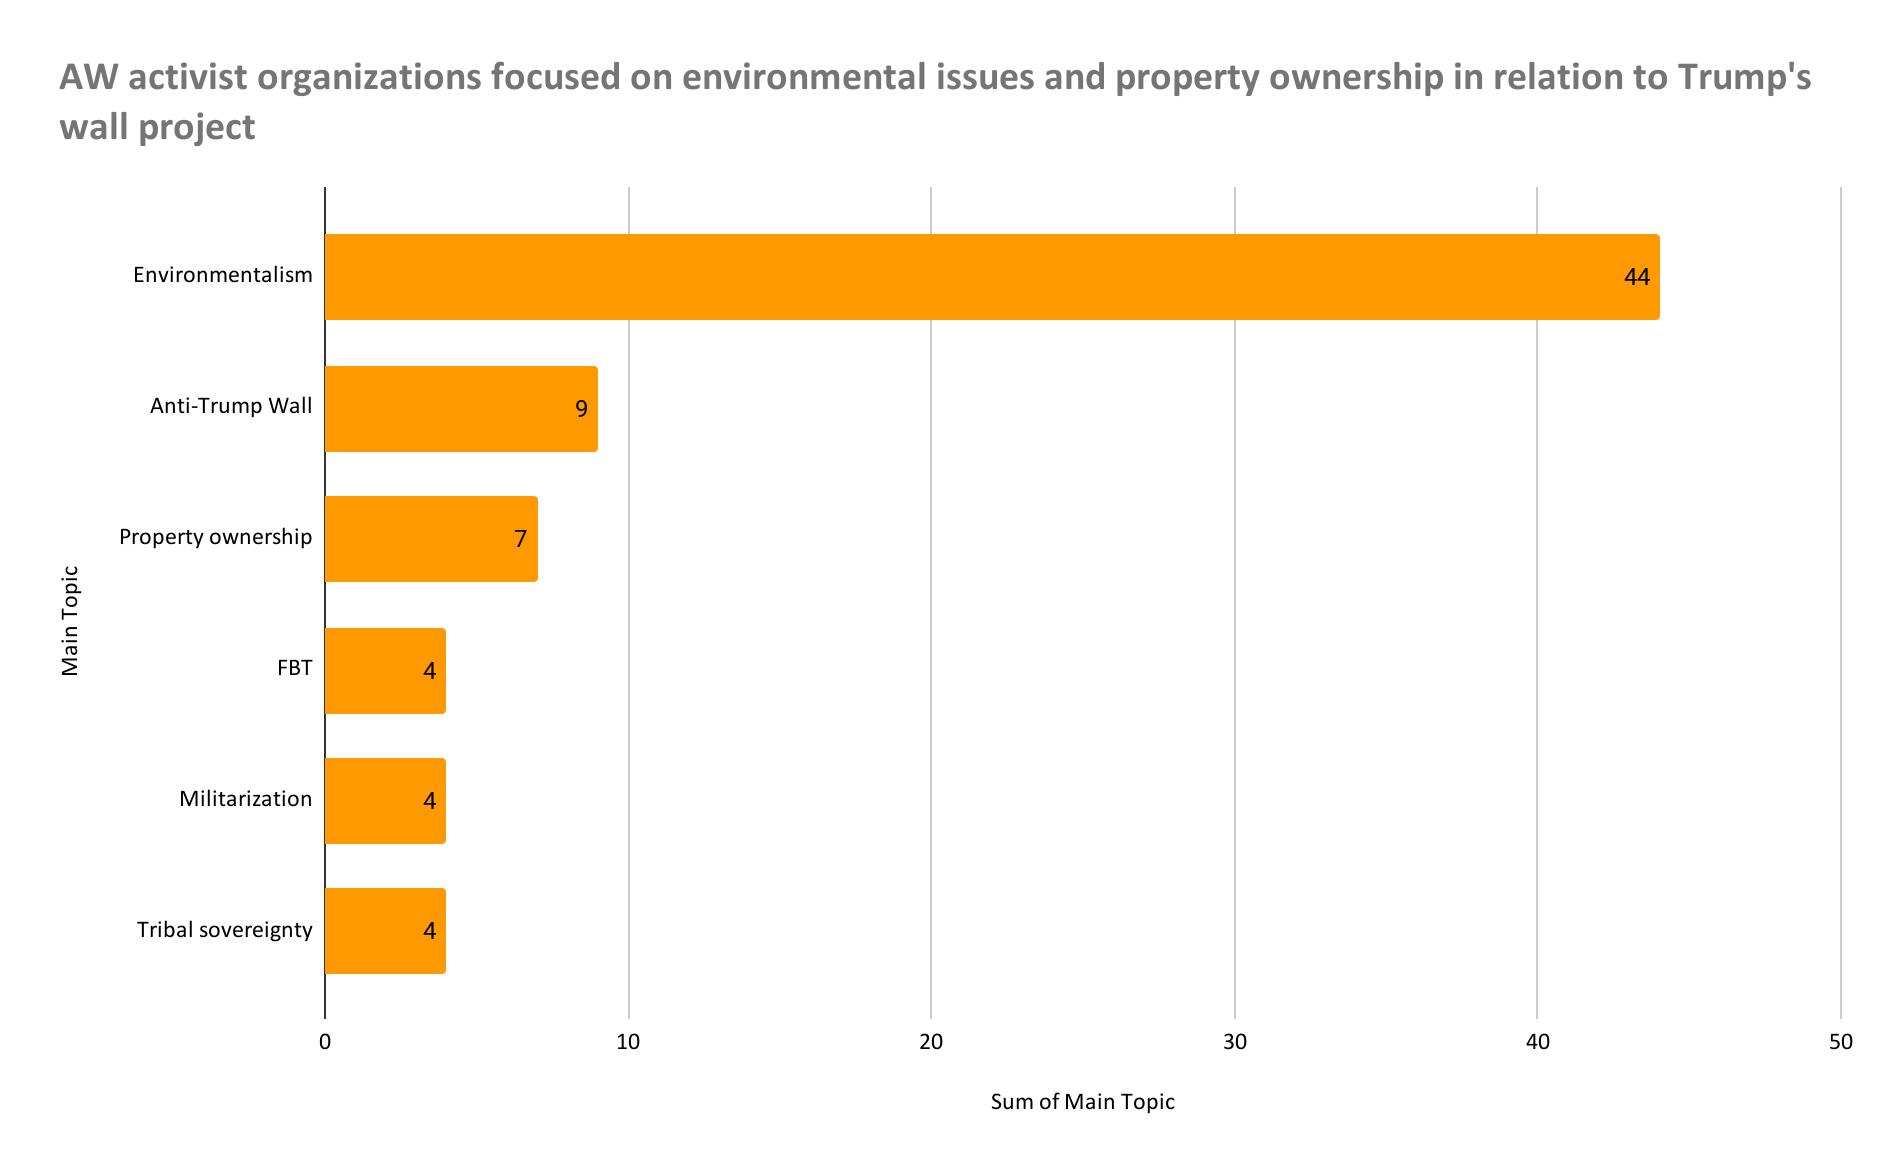 Top 5 AW activist organization topics across all periods (1-10), based on sum totals across the top 10 community hubs per period. AW activist organizations focused their topics on environmental issues and property ownership in relationship to Trump's wall project. 